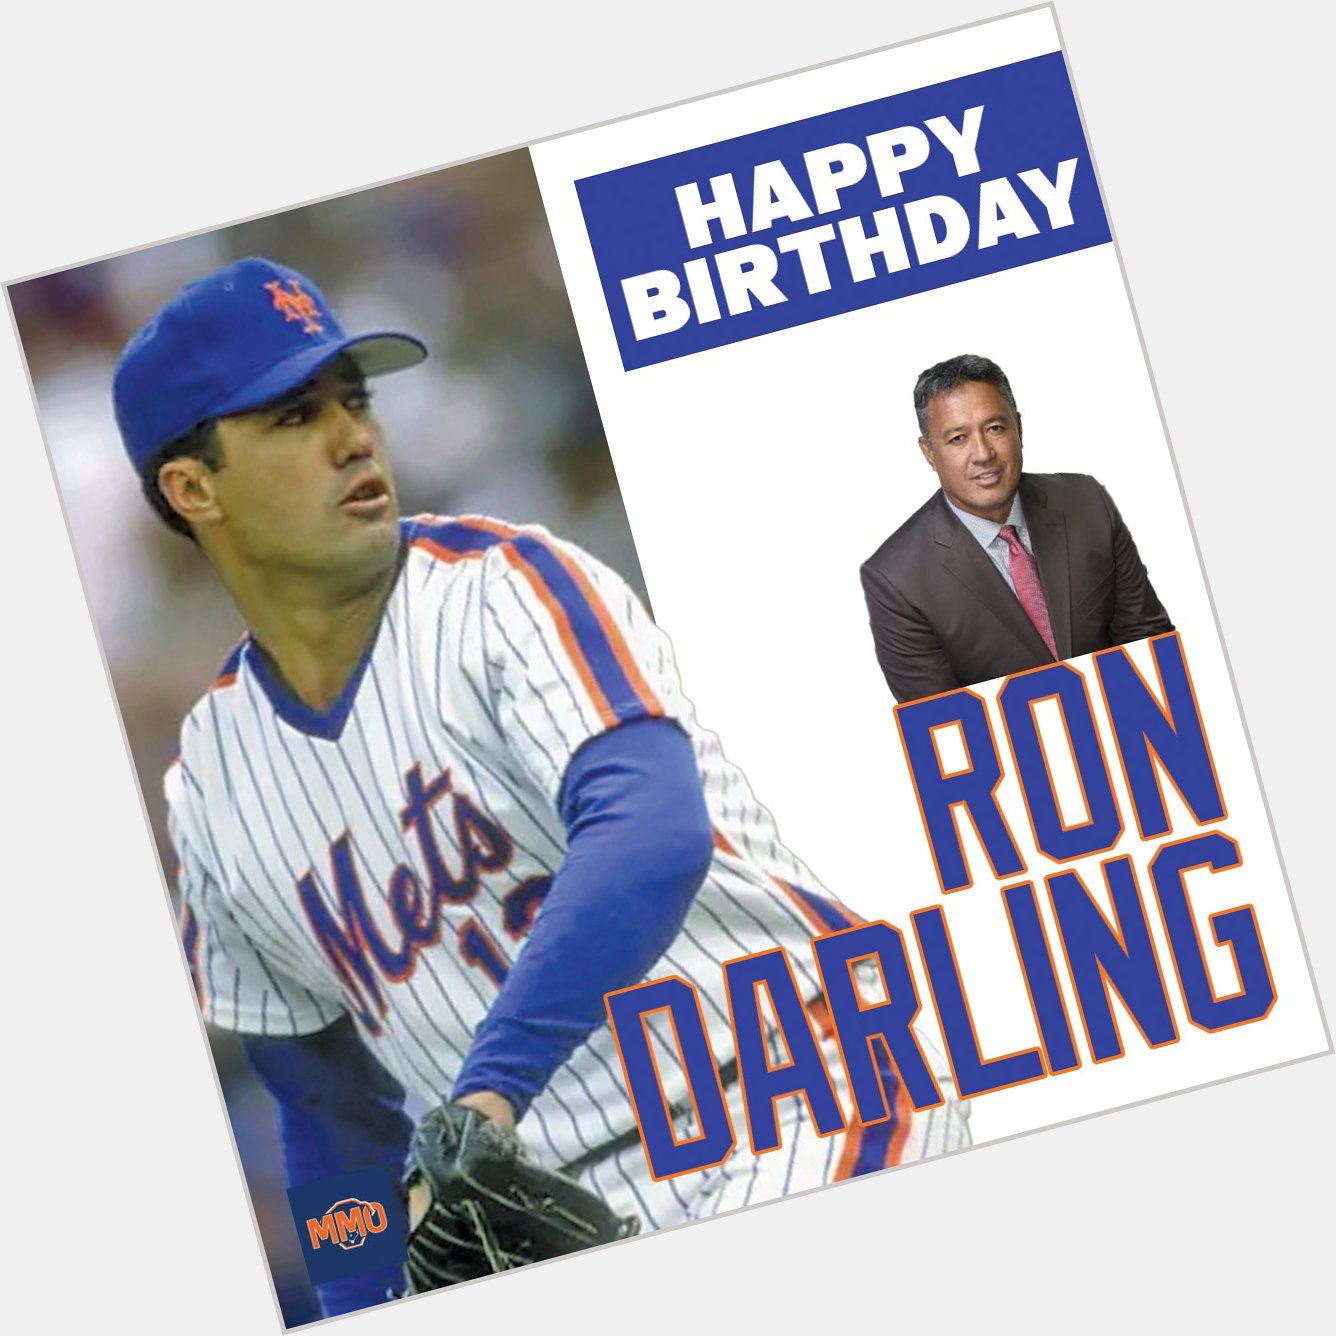  Happy birthday to Ron Darling!!     